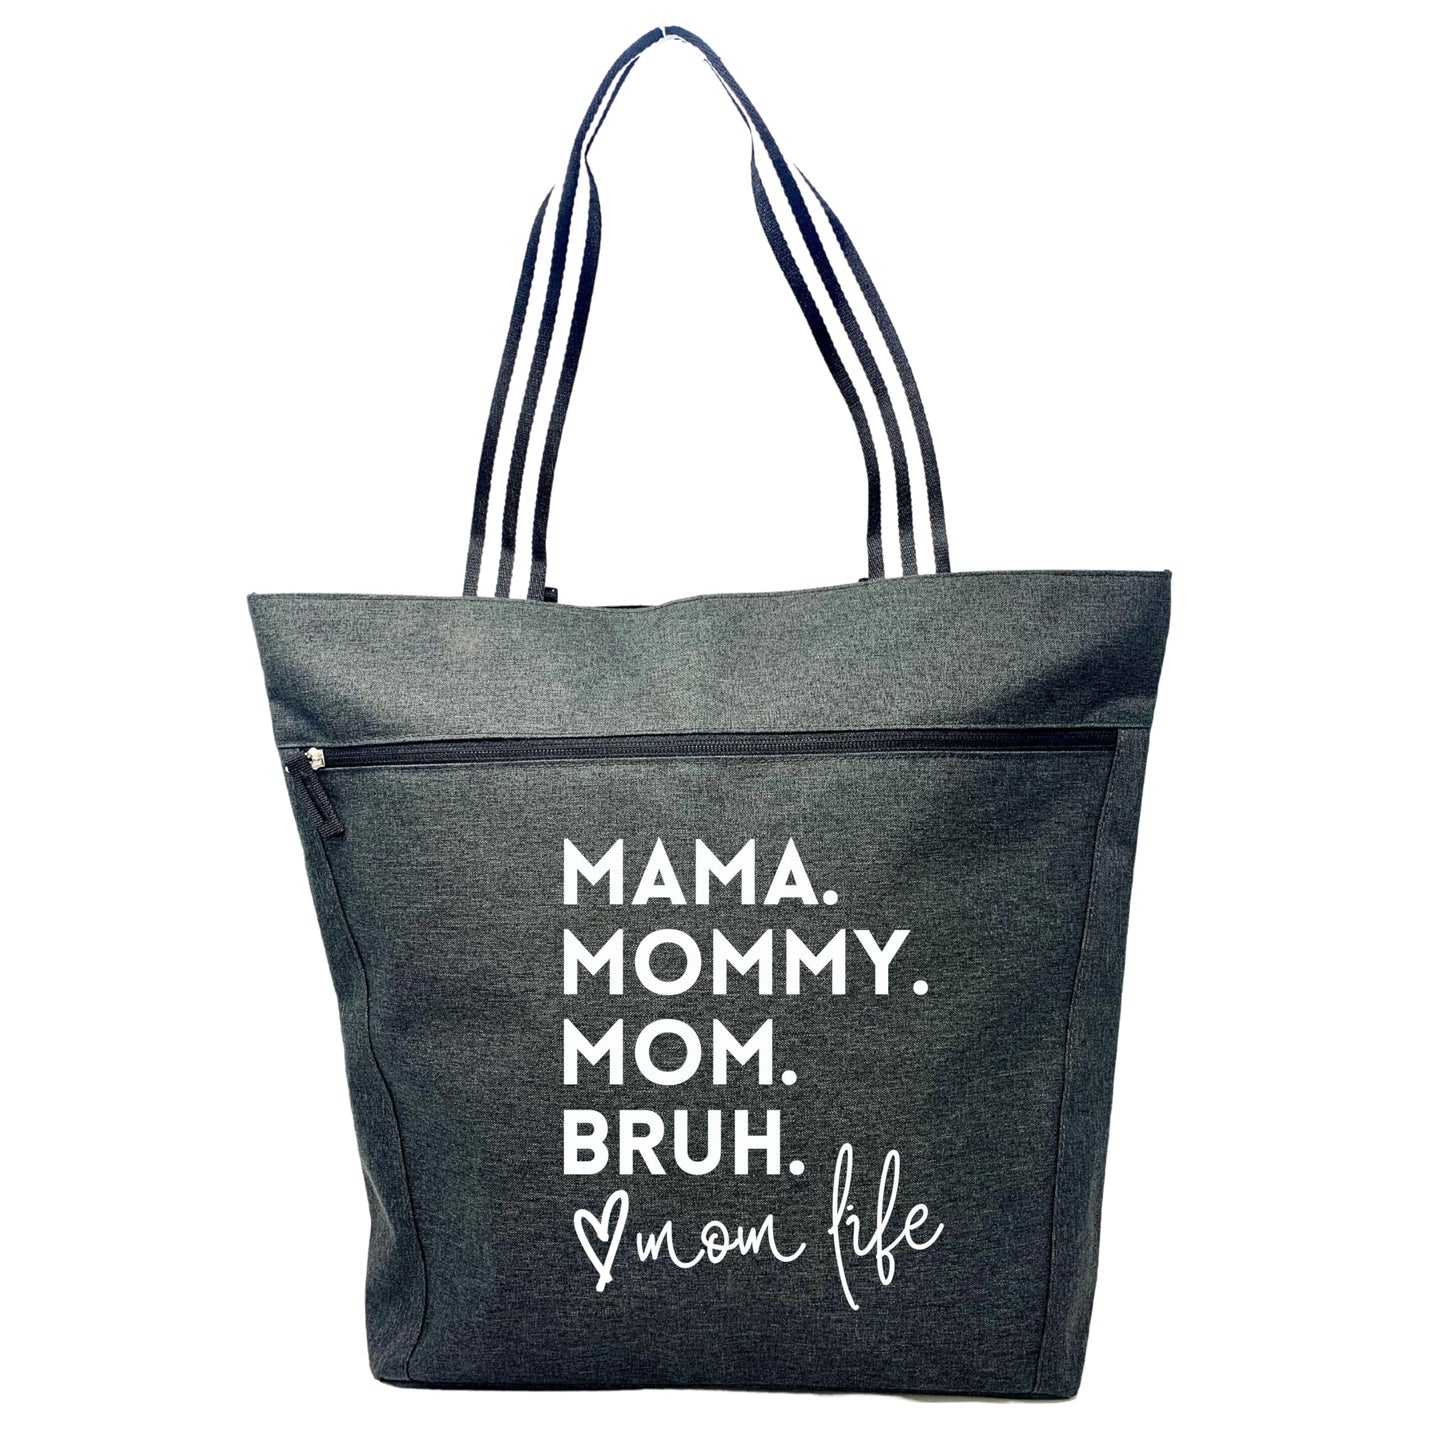 Brooke & Jess Designs Mommy Bag for Hospital - Mama Bear Mom Tote Bag - Mom Bags for Women, Maternity Bags for Expecting Mamas, Gifts for Mom (Mama Mommy Mom Bruh Lexie Black)